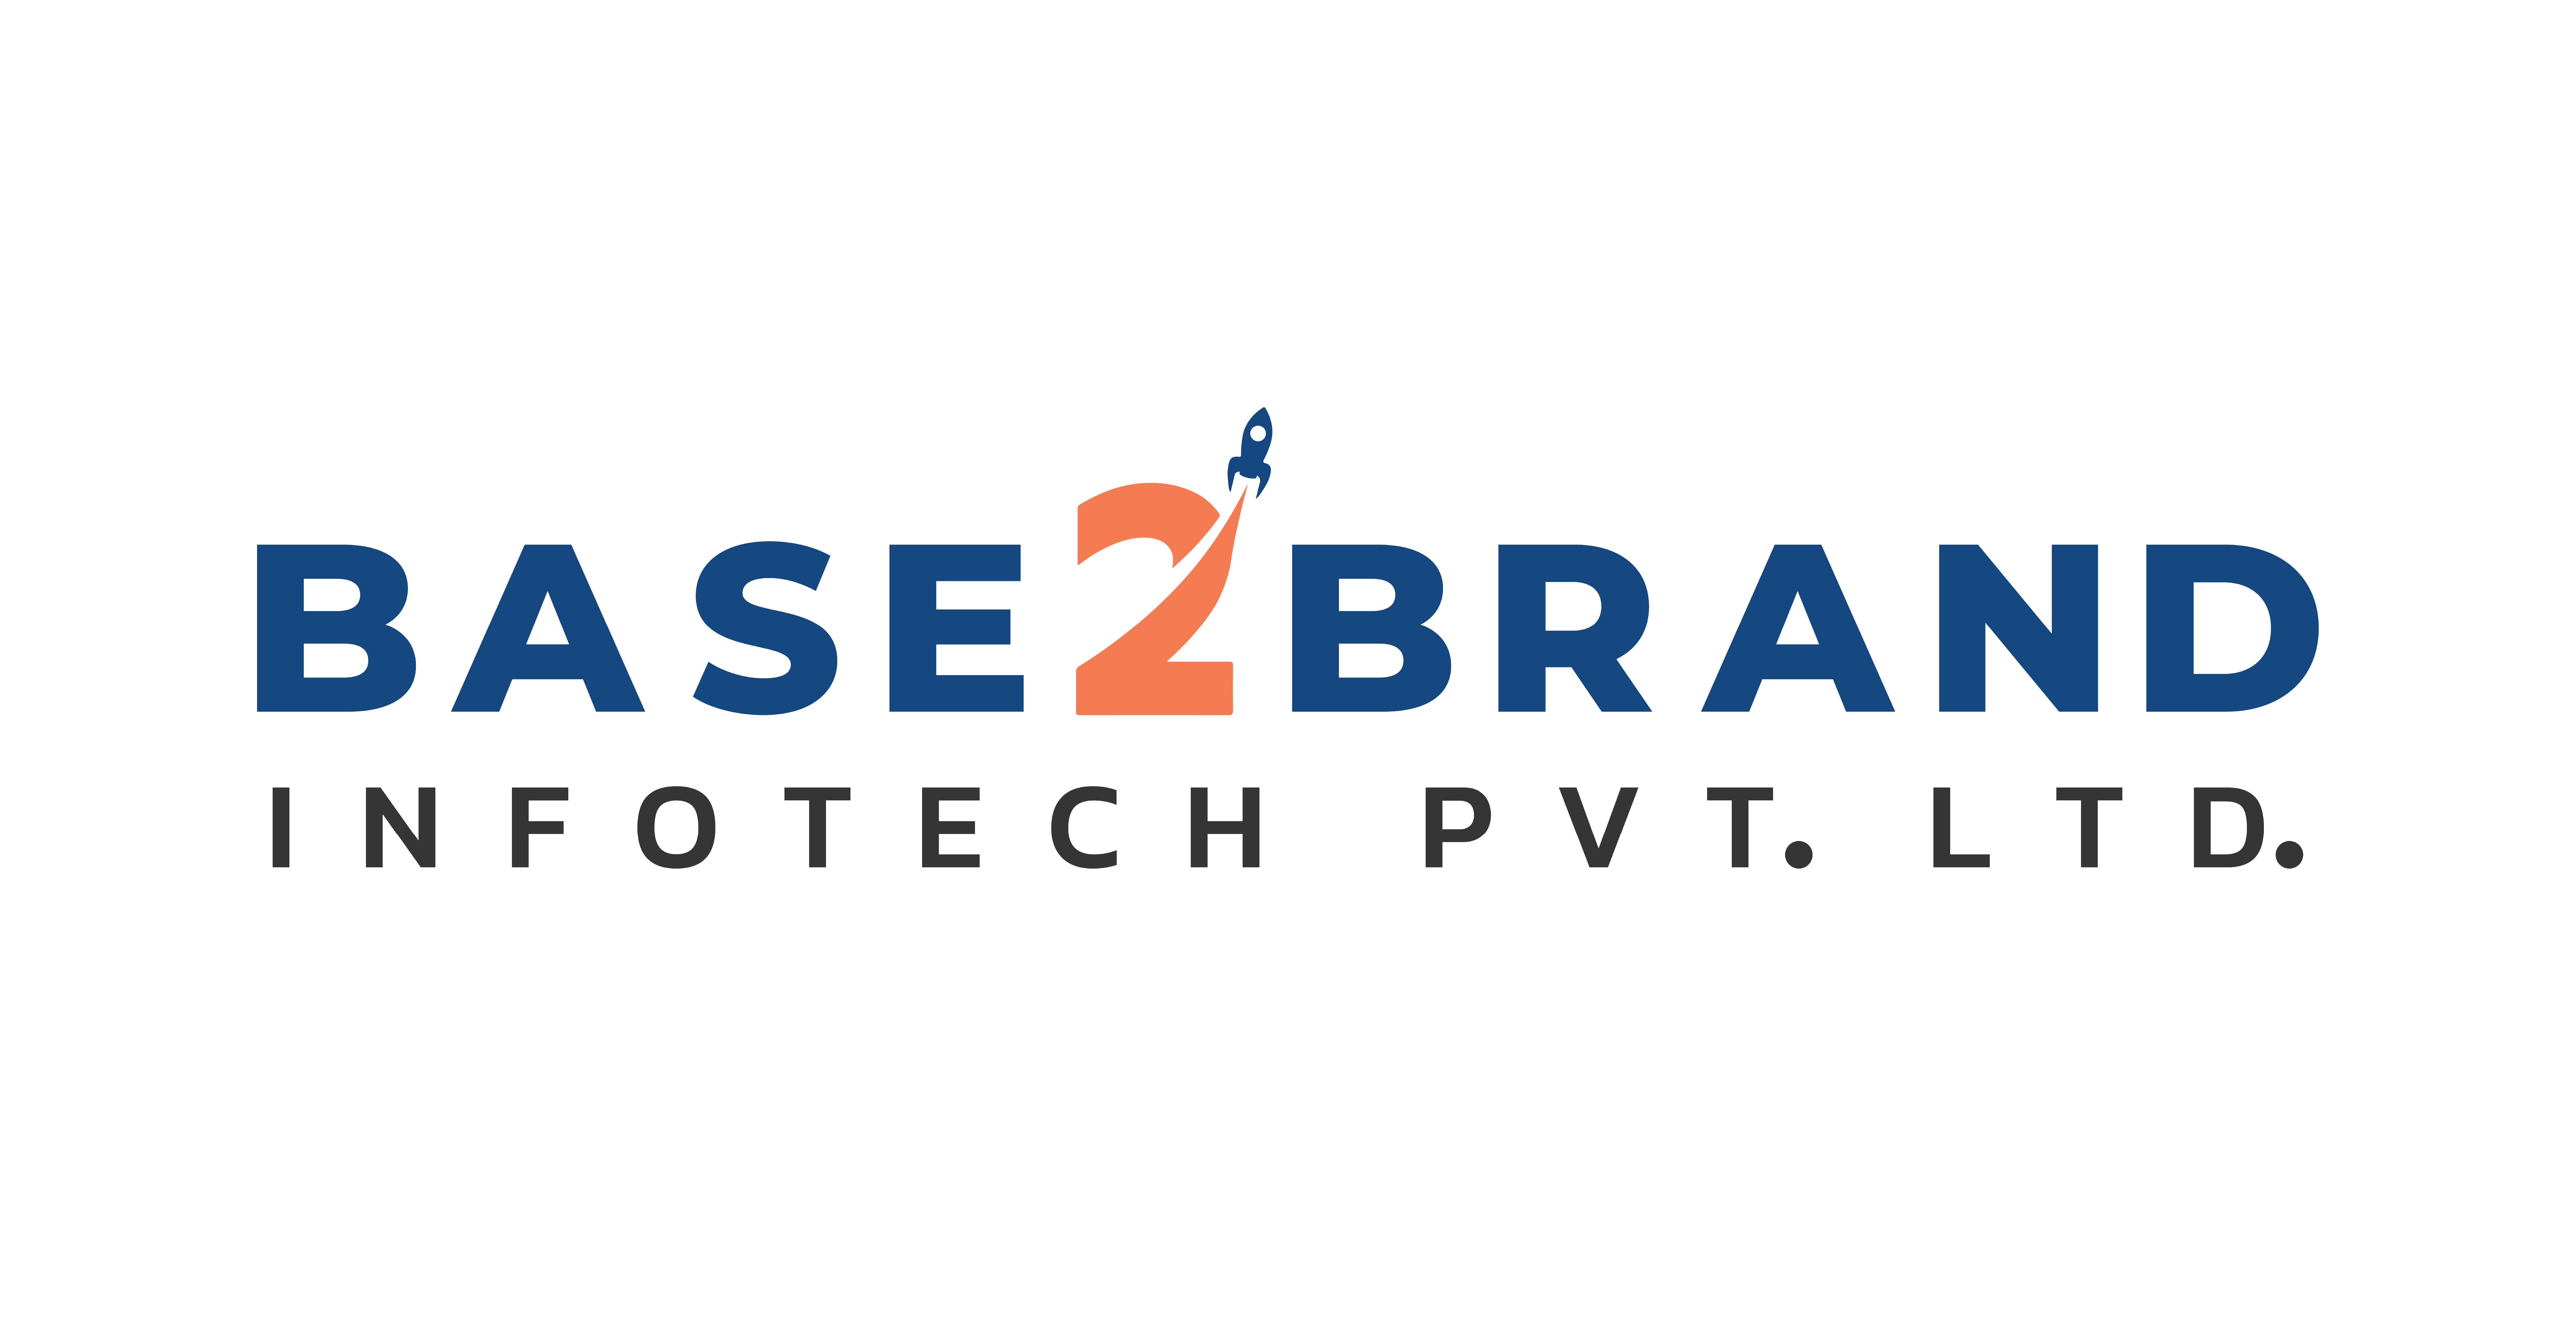 https://salesprofessionals.co.in/company/base2brand-infotech-pvt-ltd-1633950047